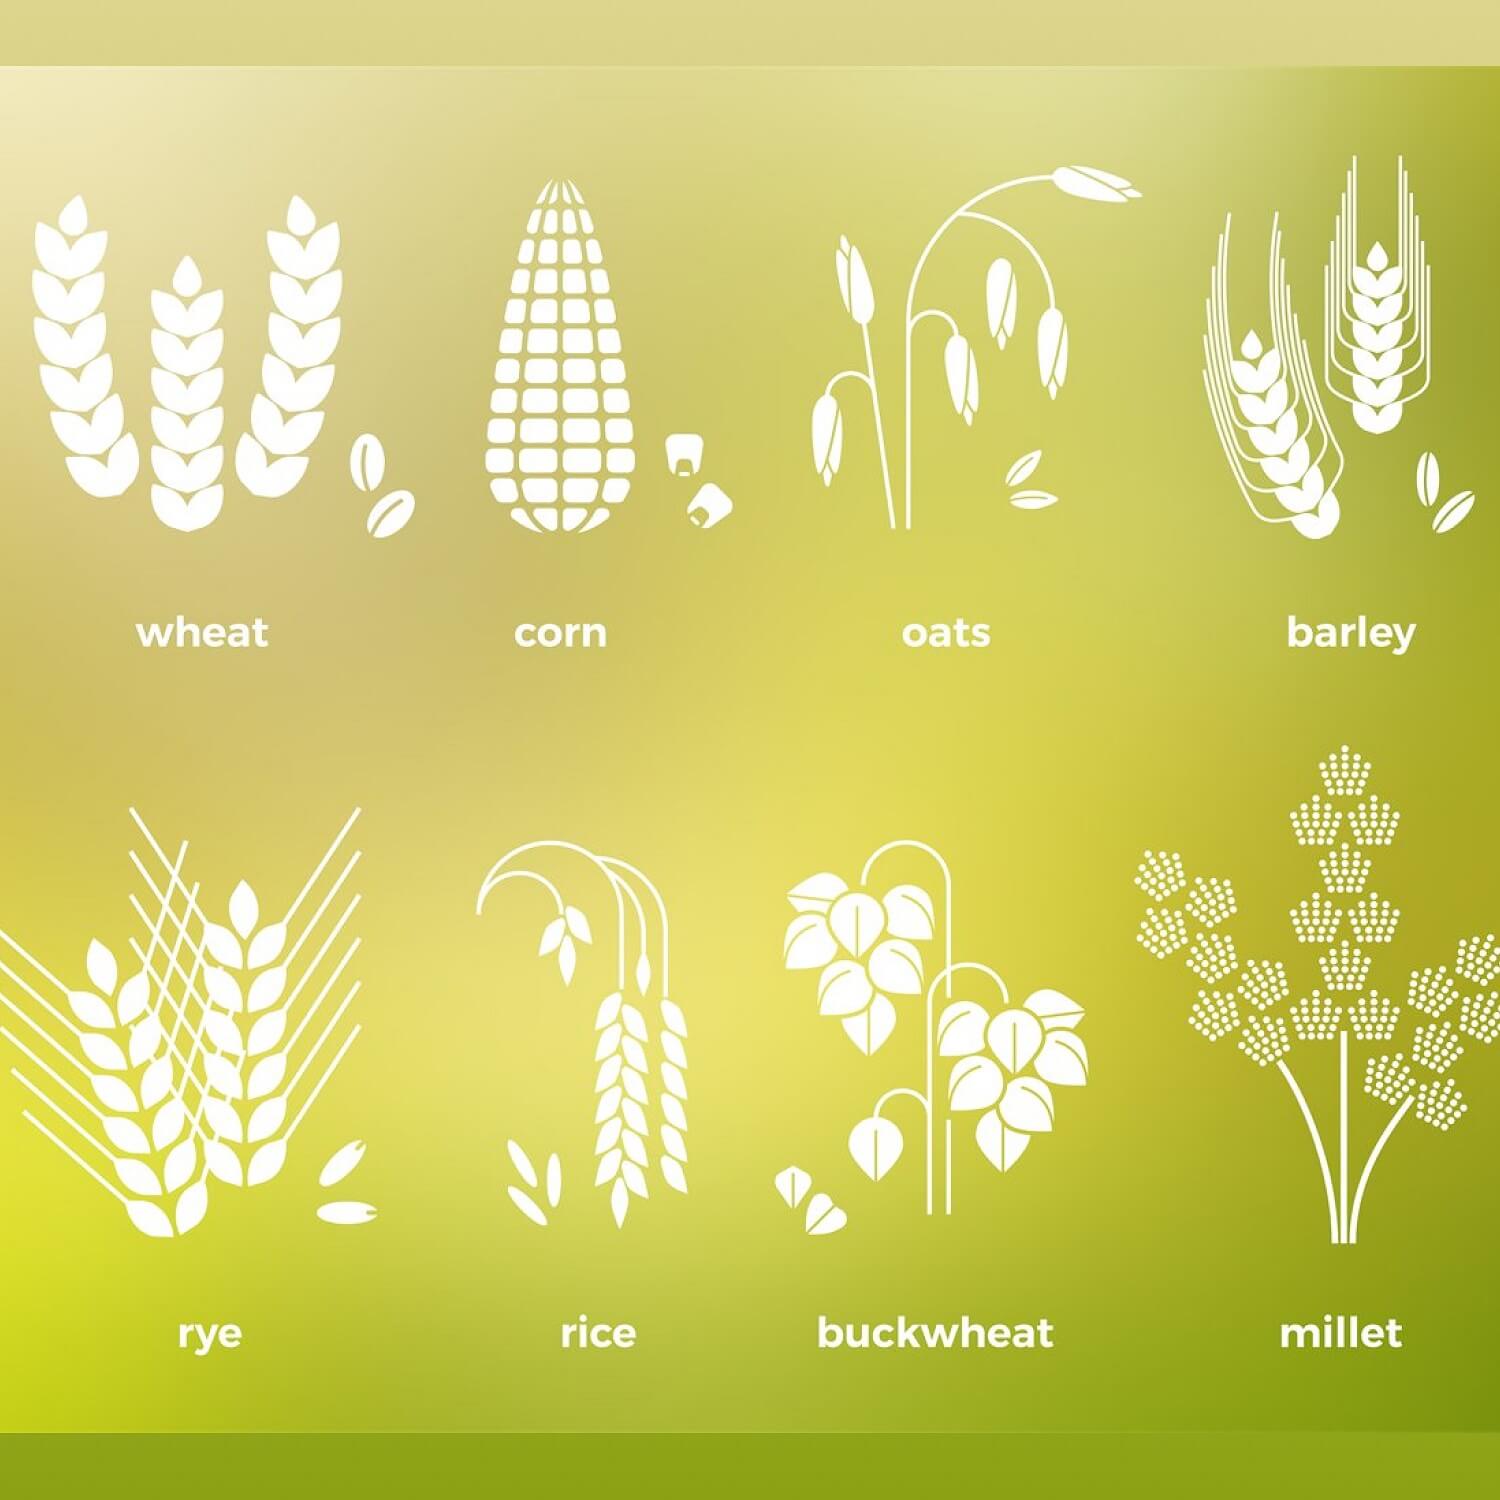 Wheat, corn, oats, barley, rye, rice, buckwheat and millet on the green background.